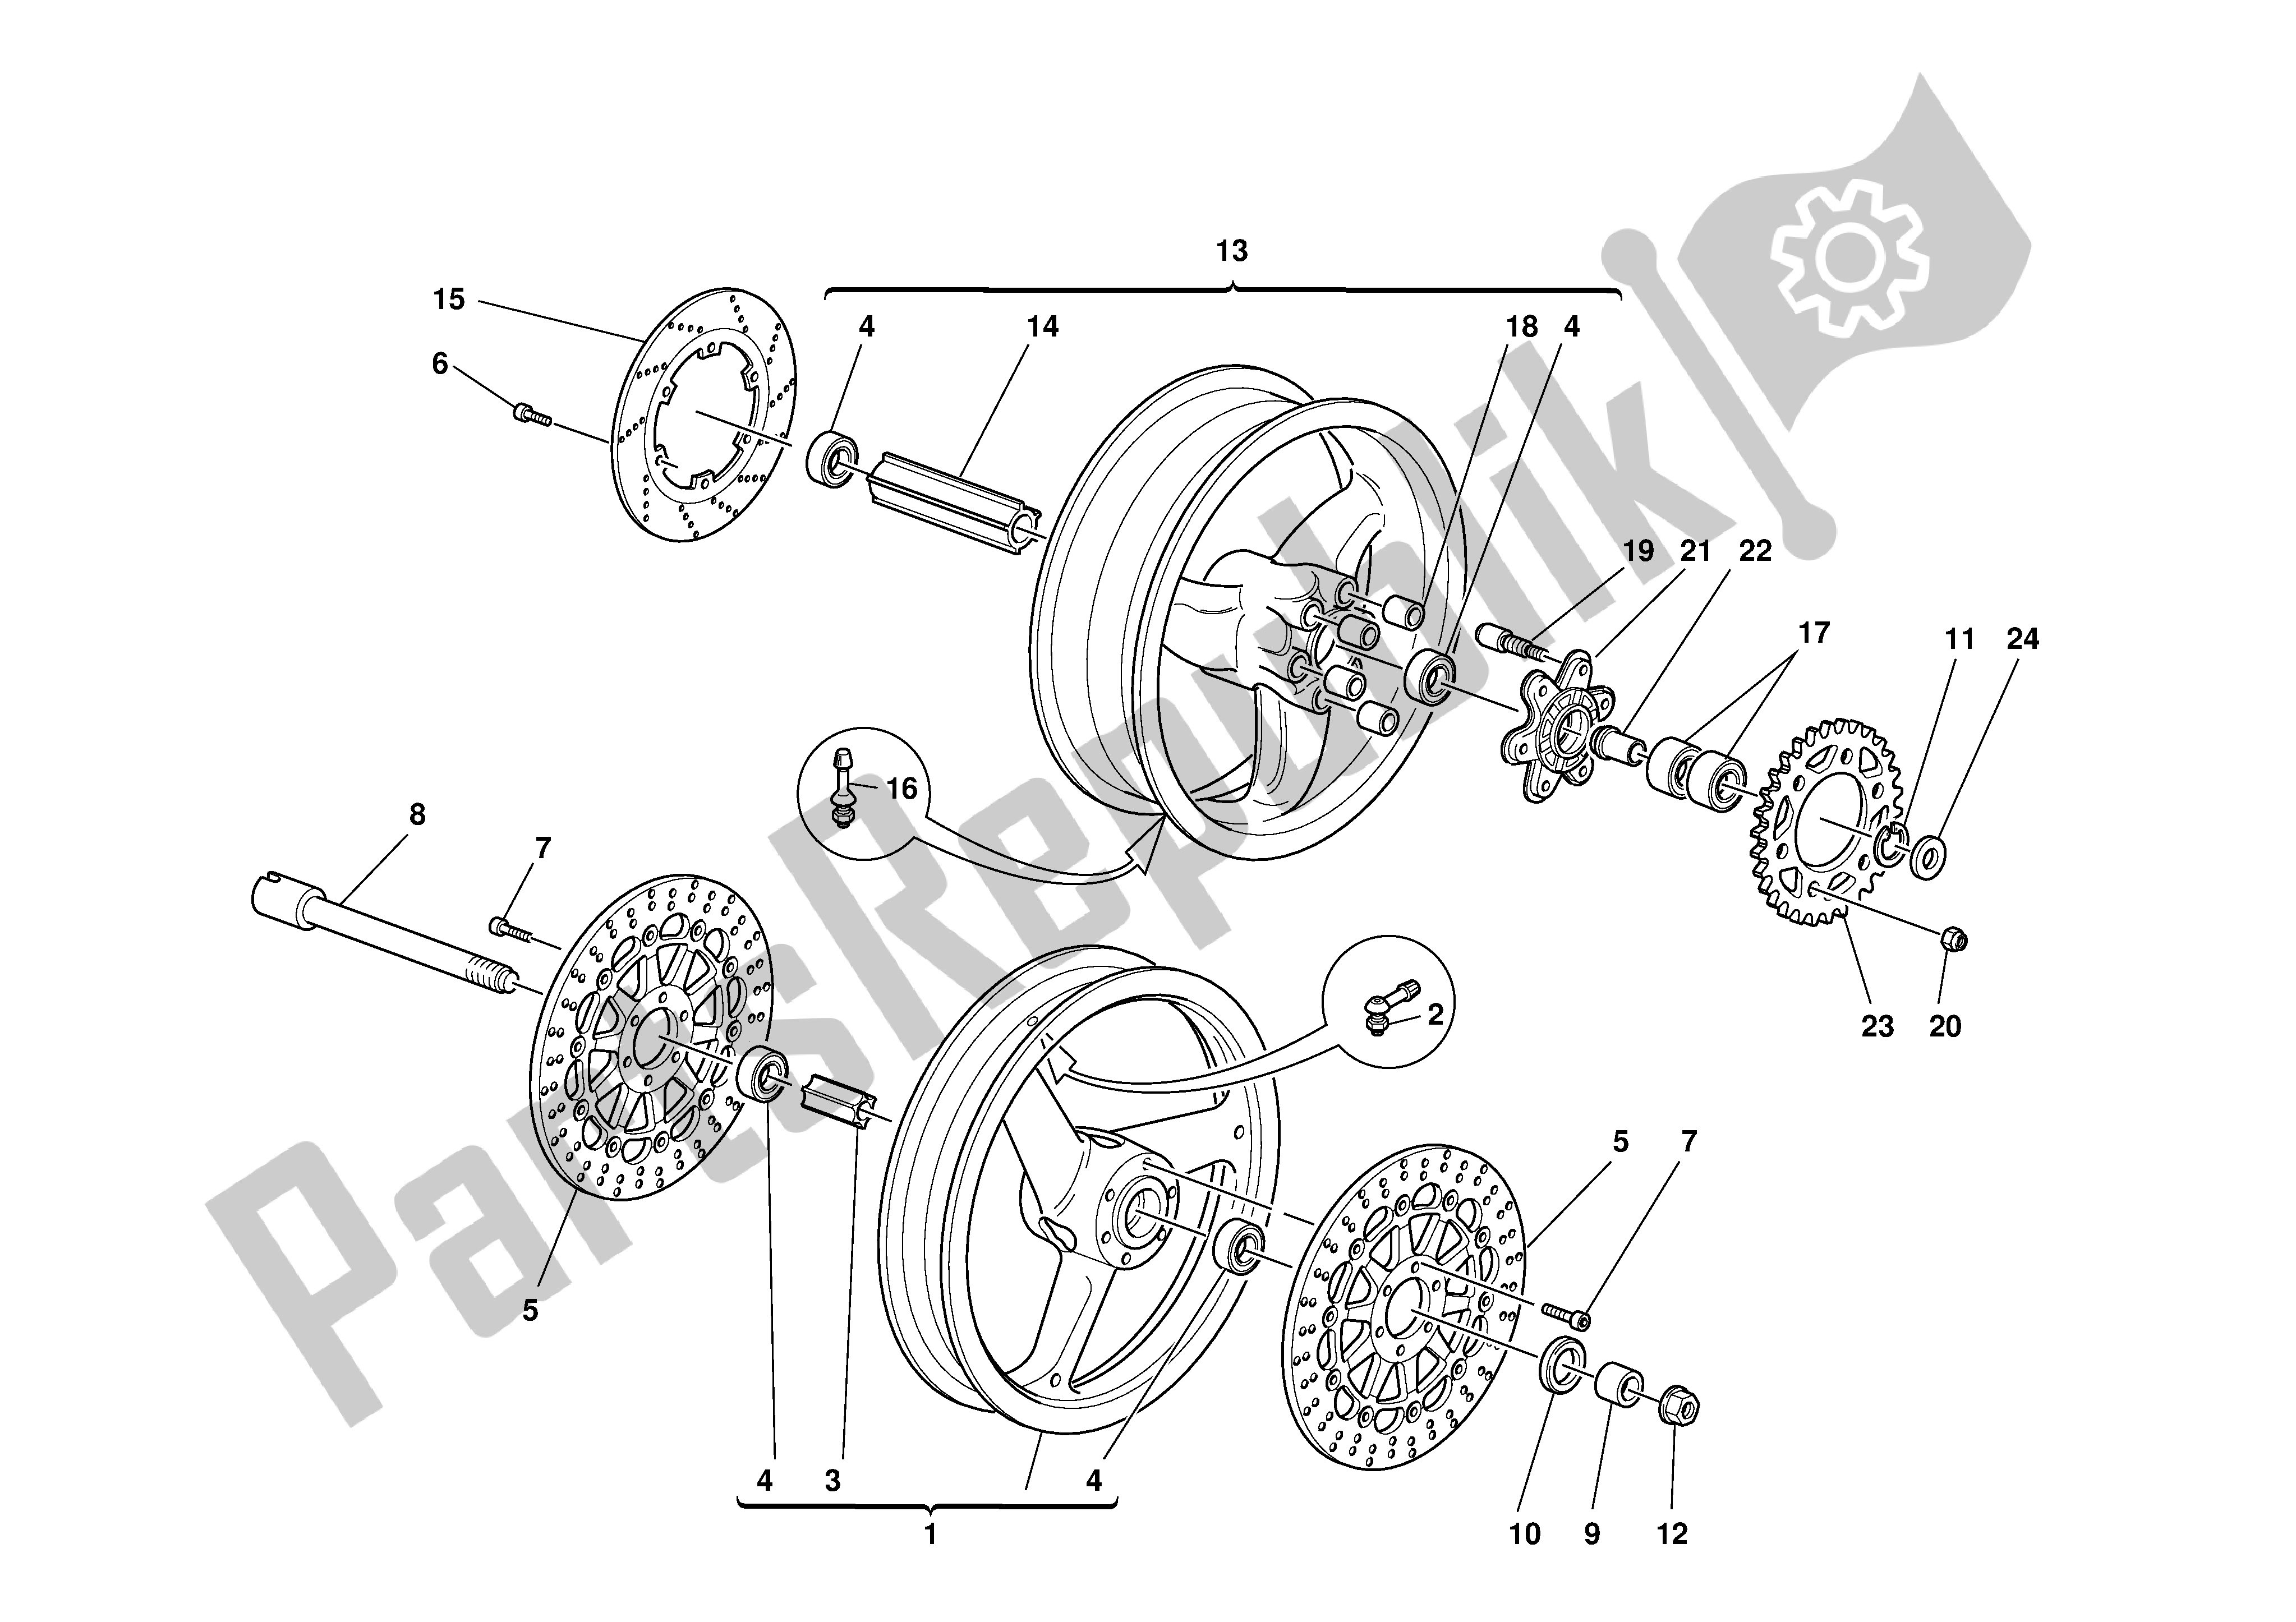 All parts for the Front And Rearwheels of the Ducati Monster S 1000 2003